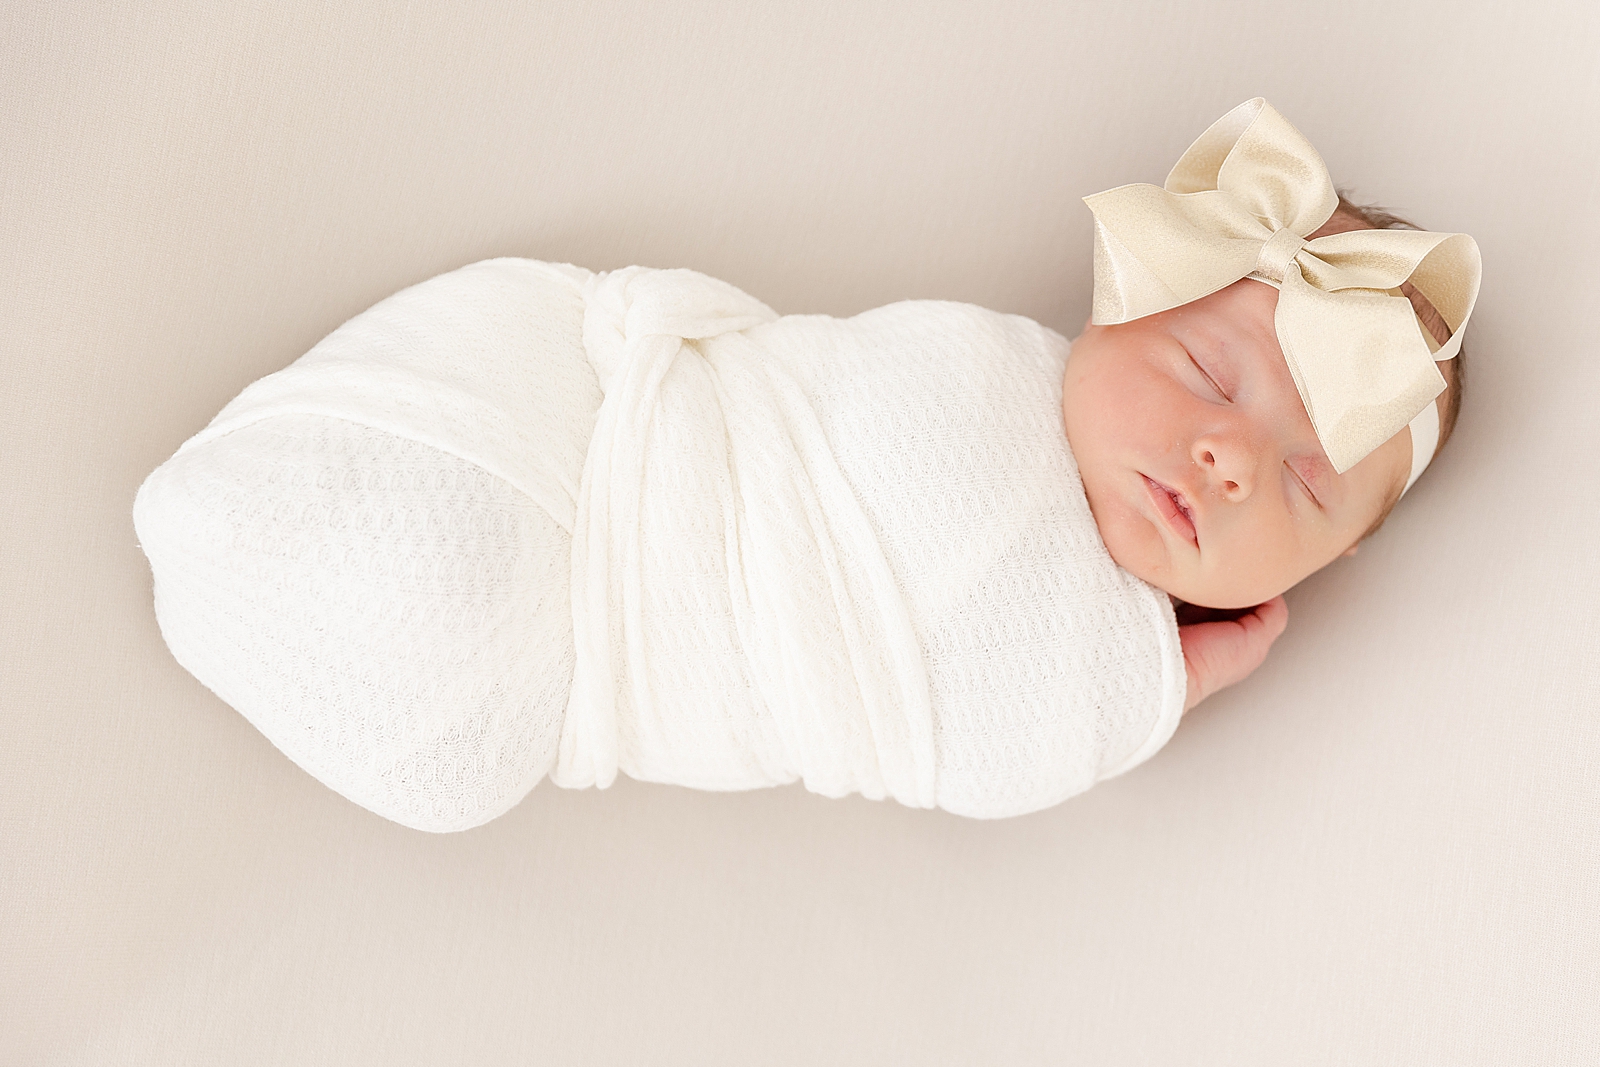 swaddle posed newborn image of baby wearing white swaddle with gold bow on camel colored background asleep